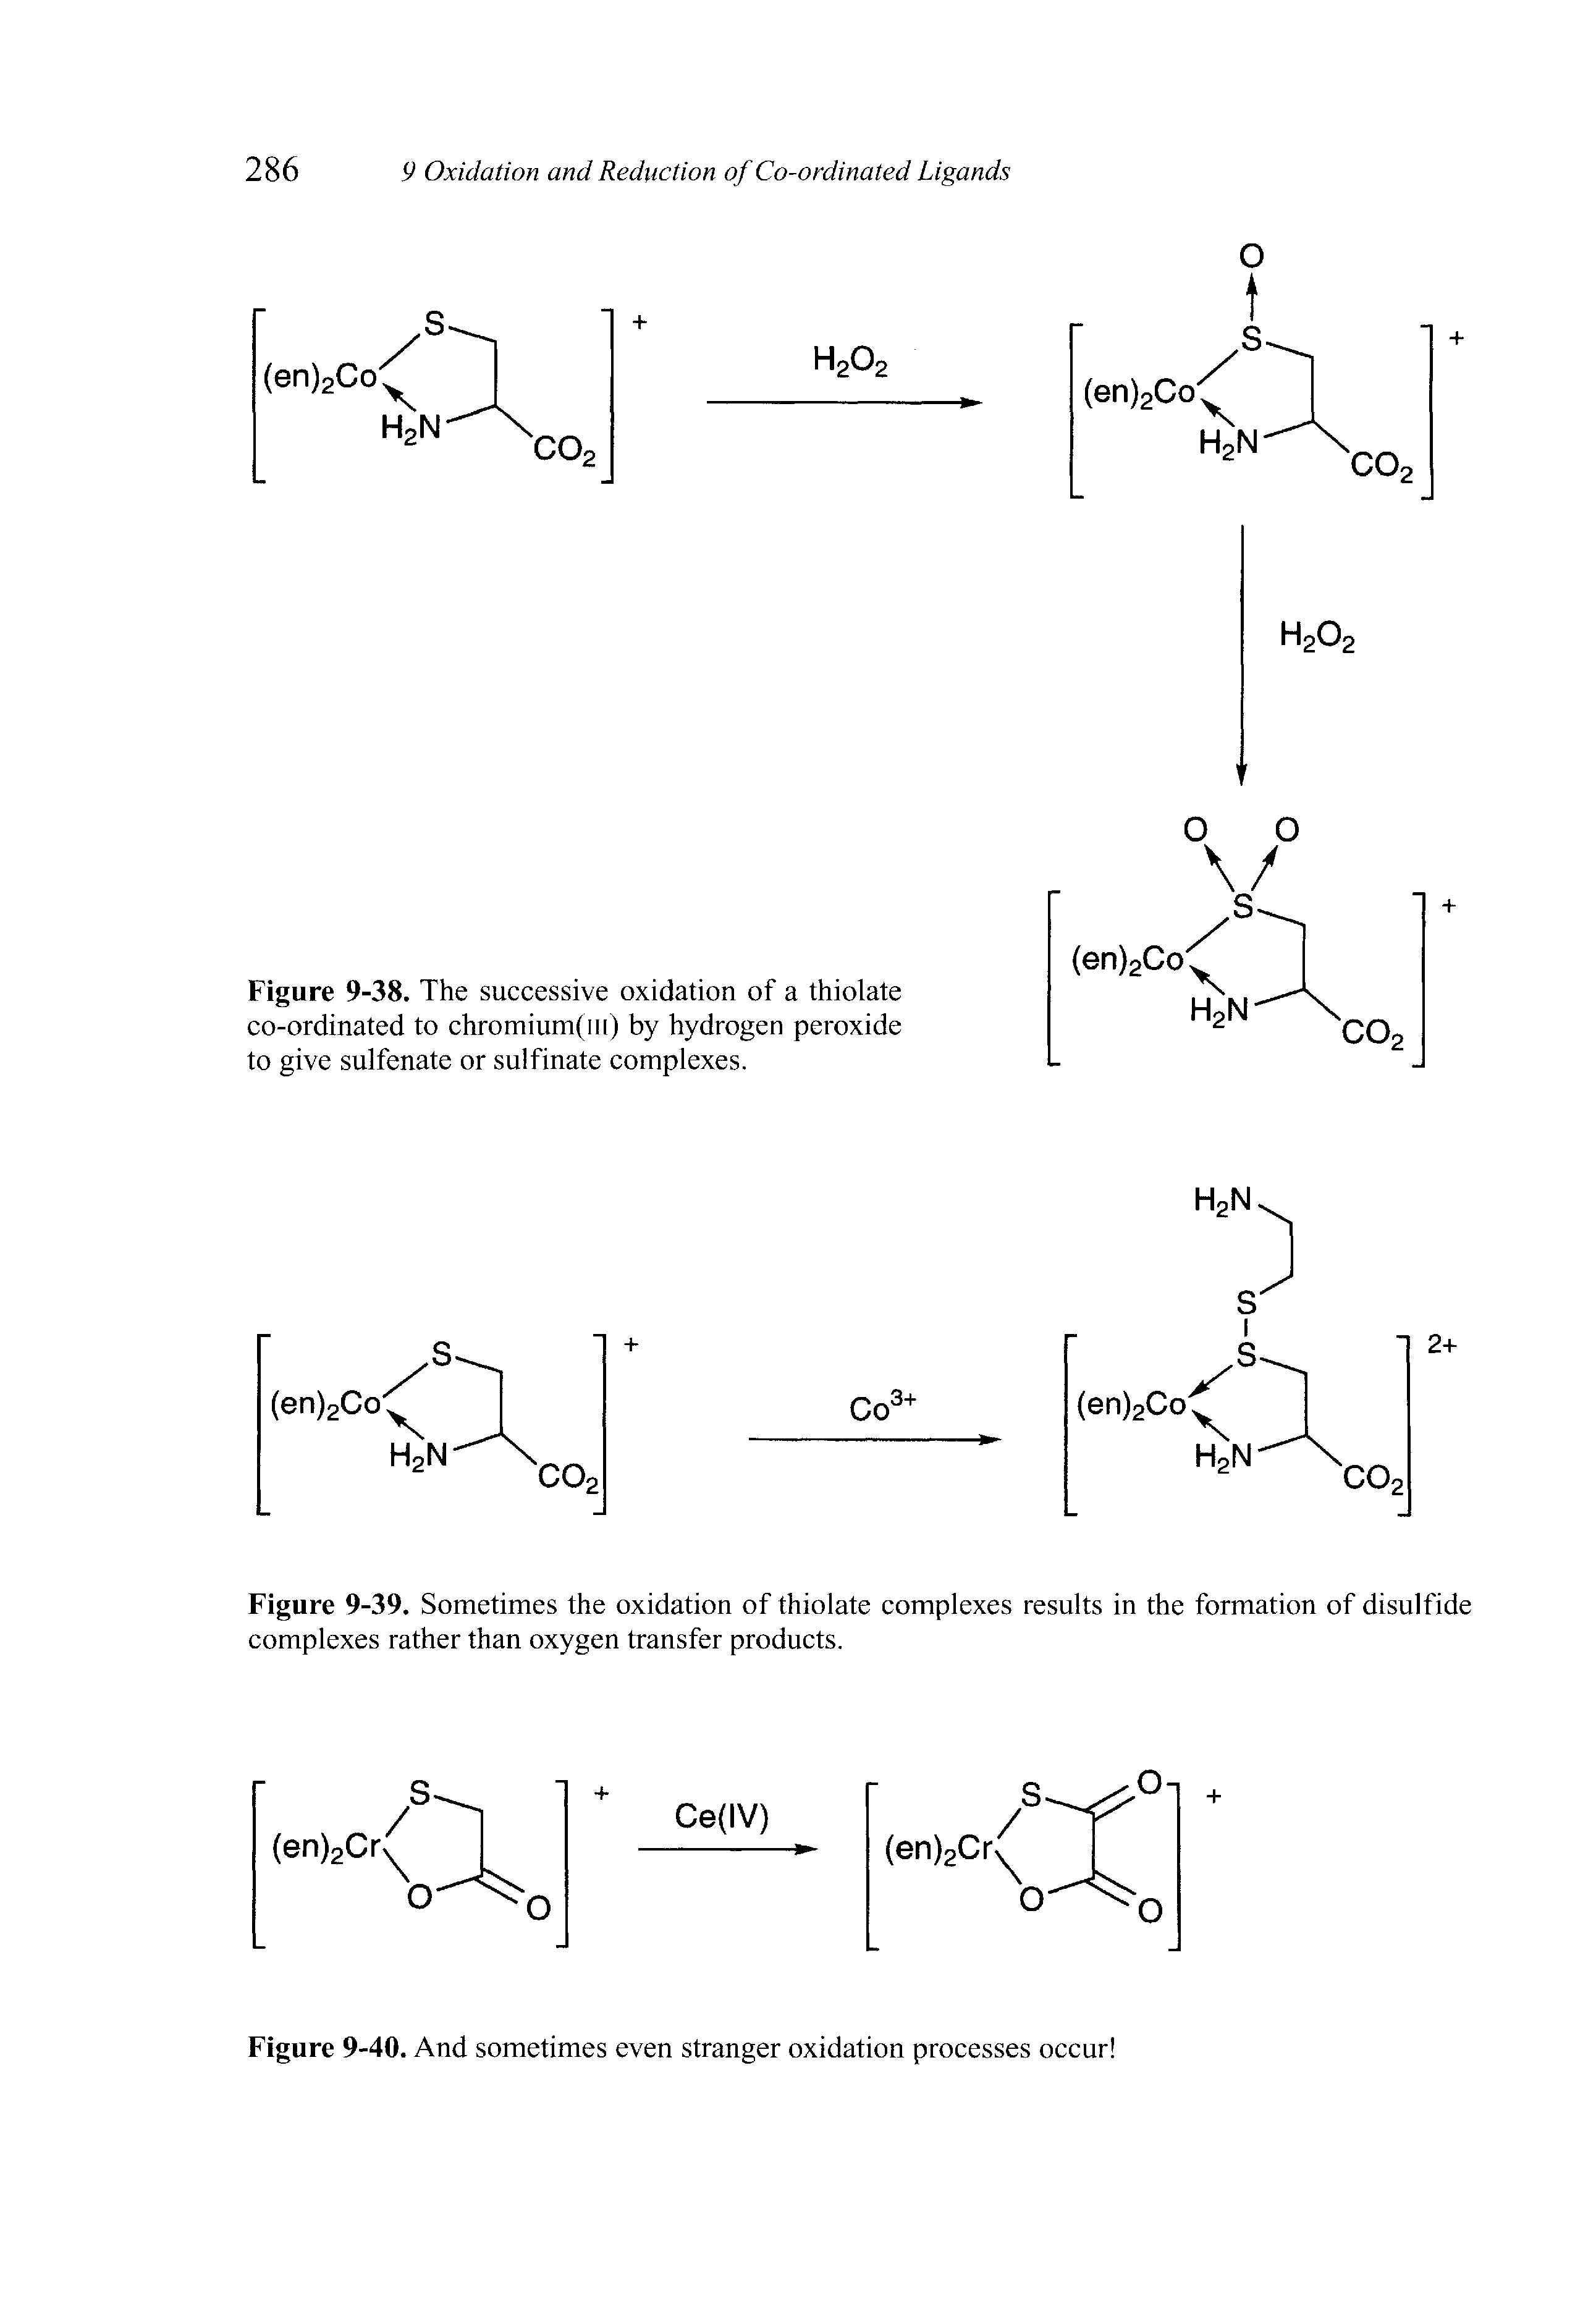 Figure 9-39. Sometimes the oxidation of thiolate complexes results in the formation of disulfide complexes rather than oxygen transfer products.